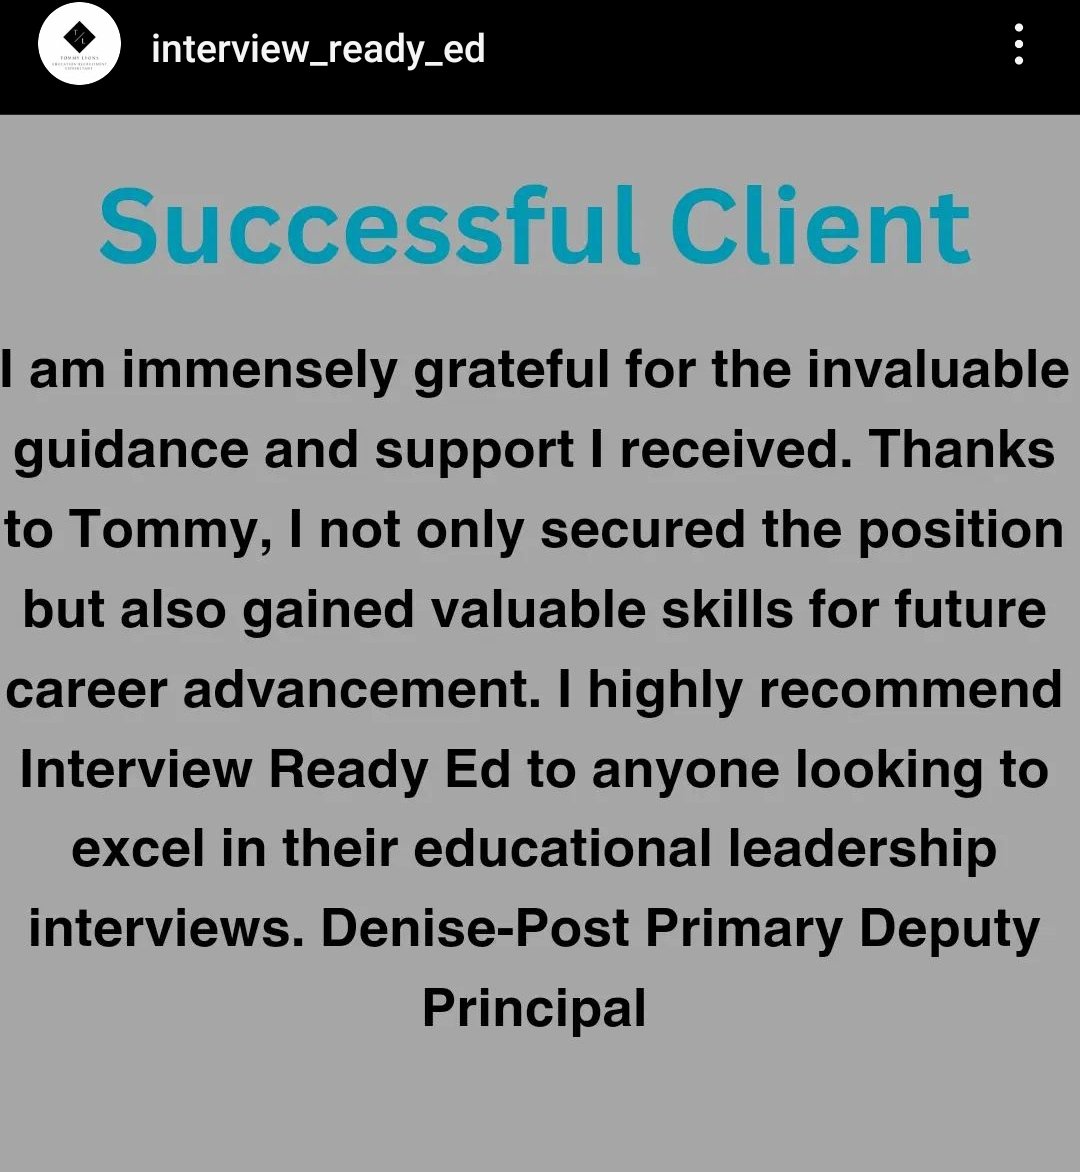 Delighted to help this fantastic lady realise her goals. #edchatie @pdsl #aspiringleaders #interviewreadyed #deputyprincipal #postprimary